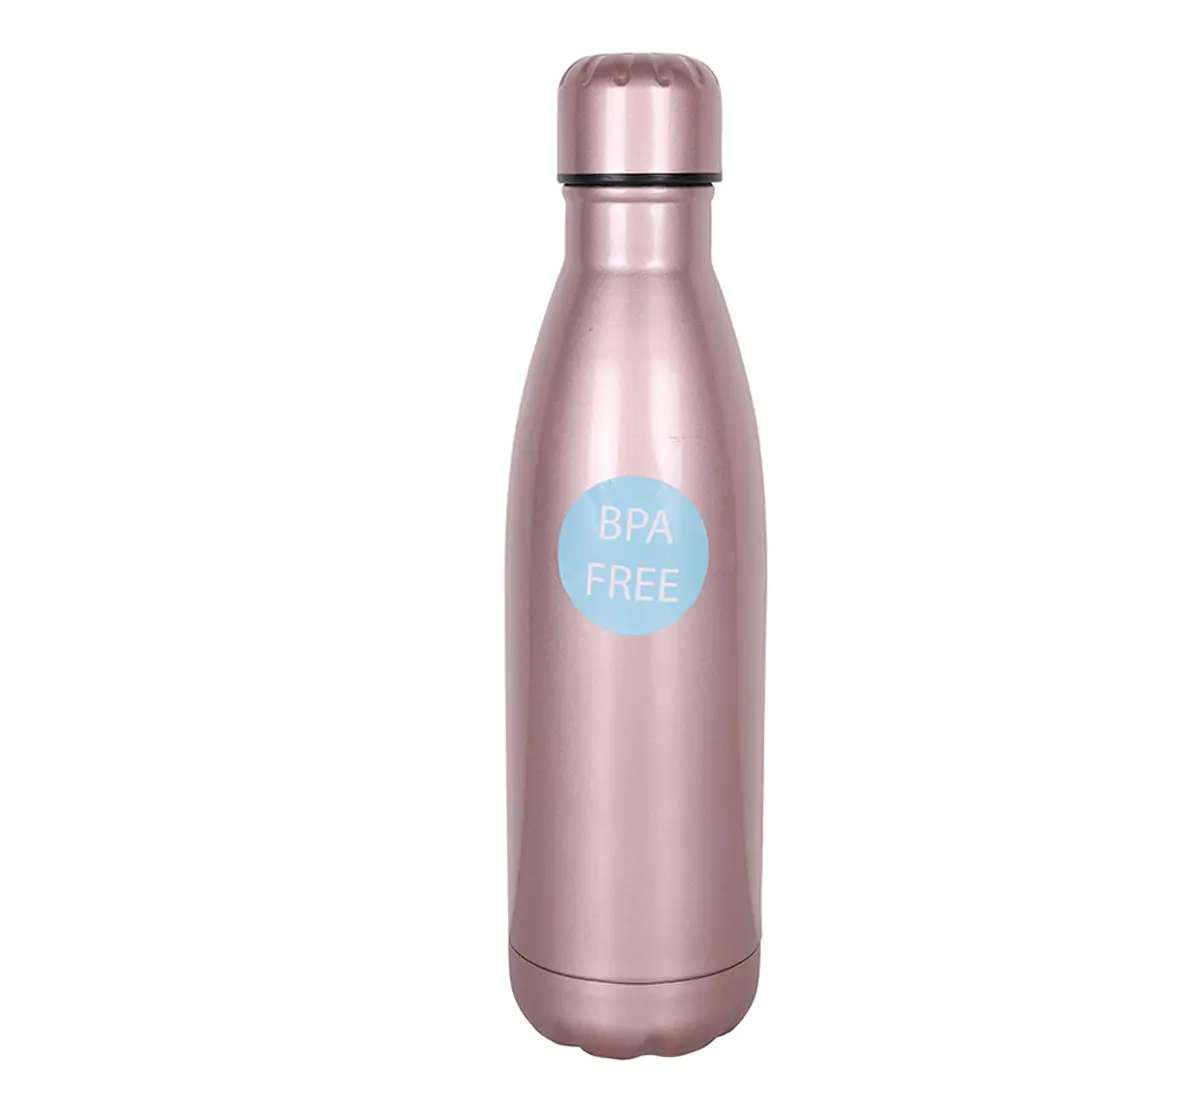 Stainless Steel Insulated Water Bottle by Hamster London for Kids, Rose Pink, Non-Toxic, BPA Free, 750ml, 5Y+